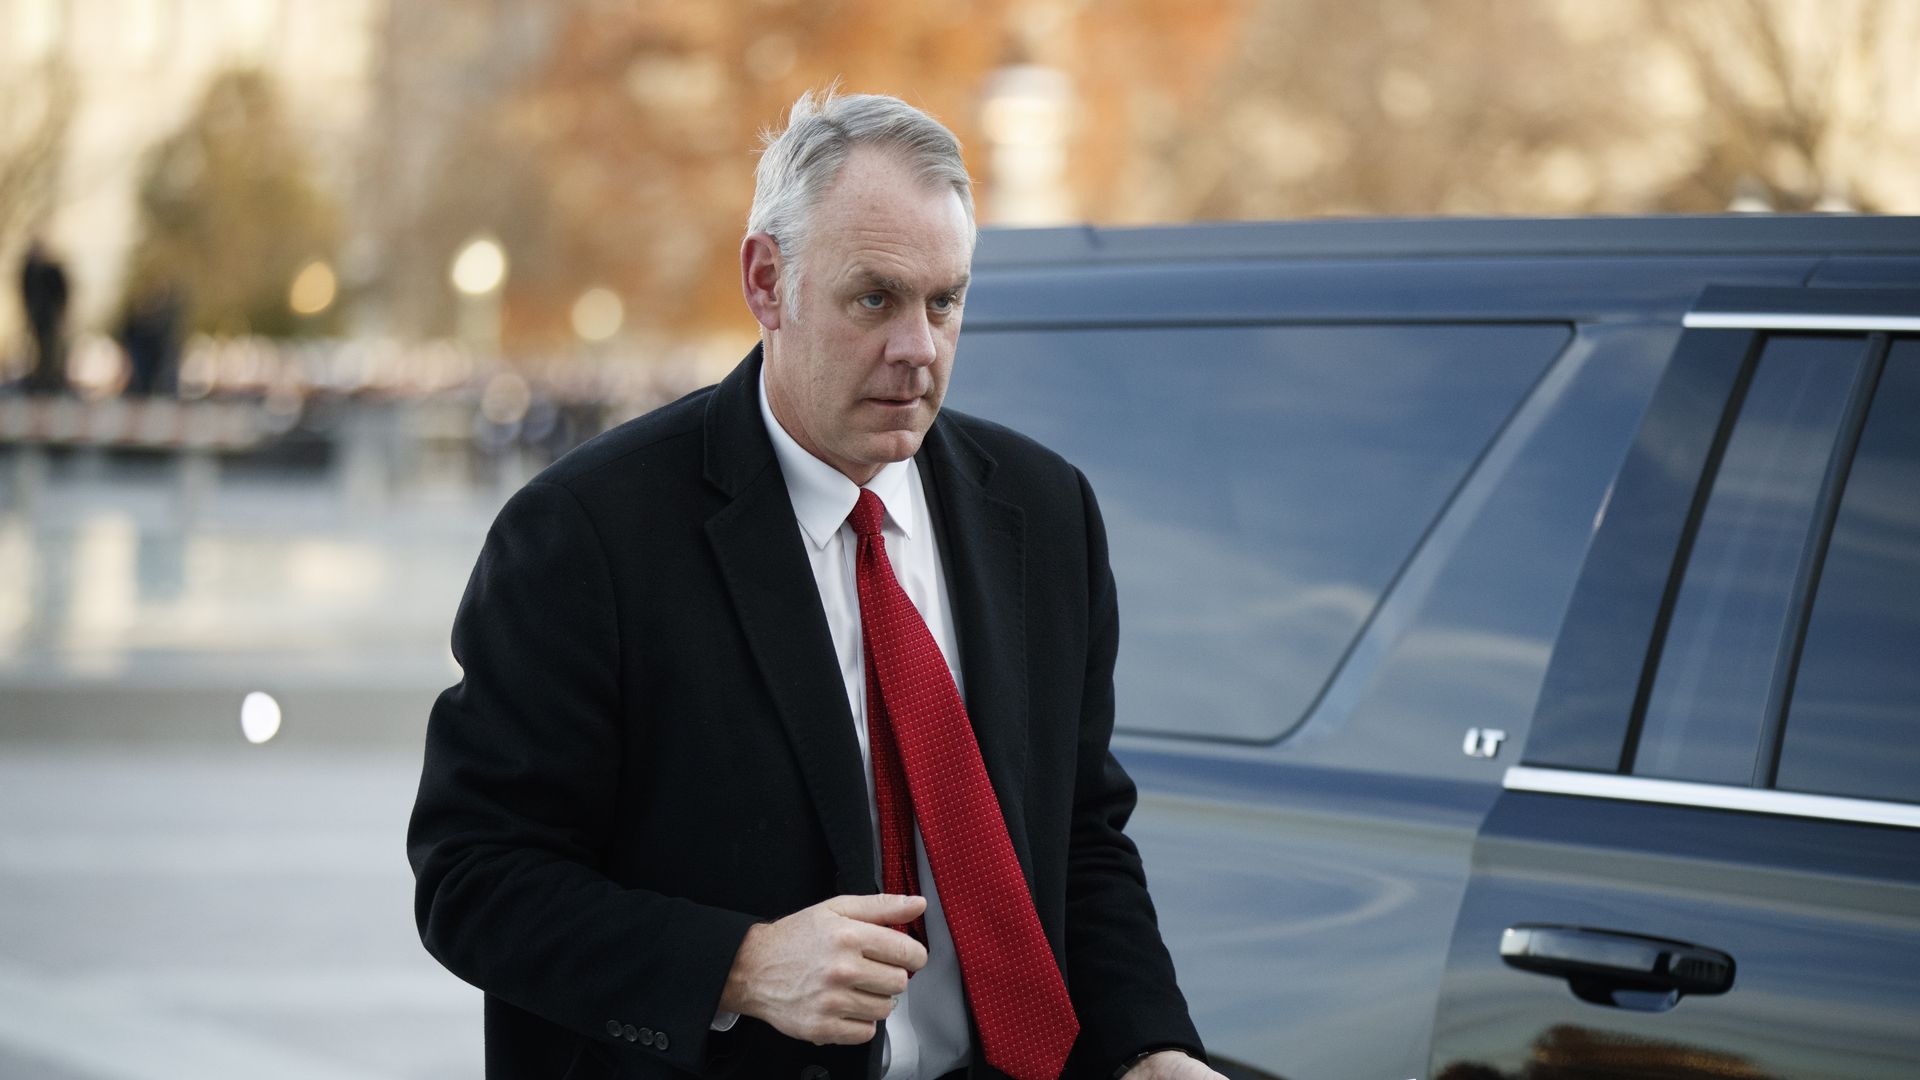 In this image, Ryan Zinke walks out of a black SUV with a red tie. 